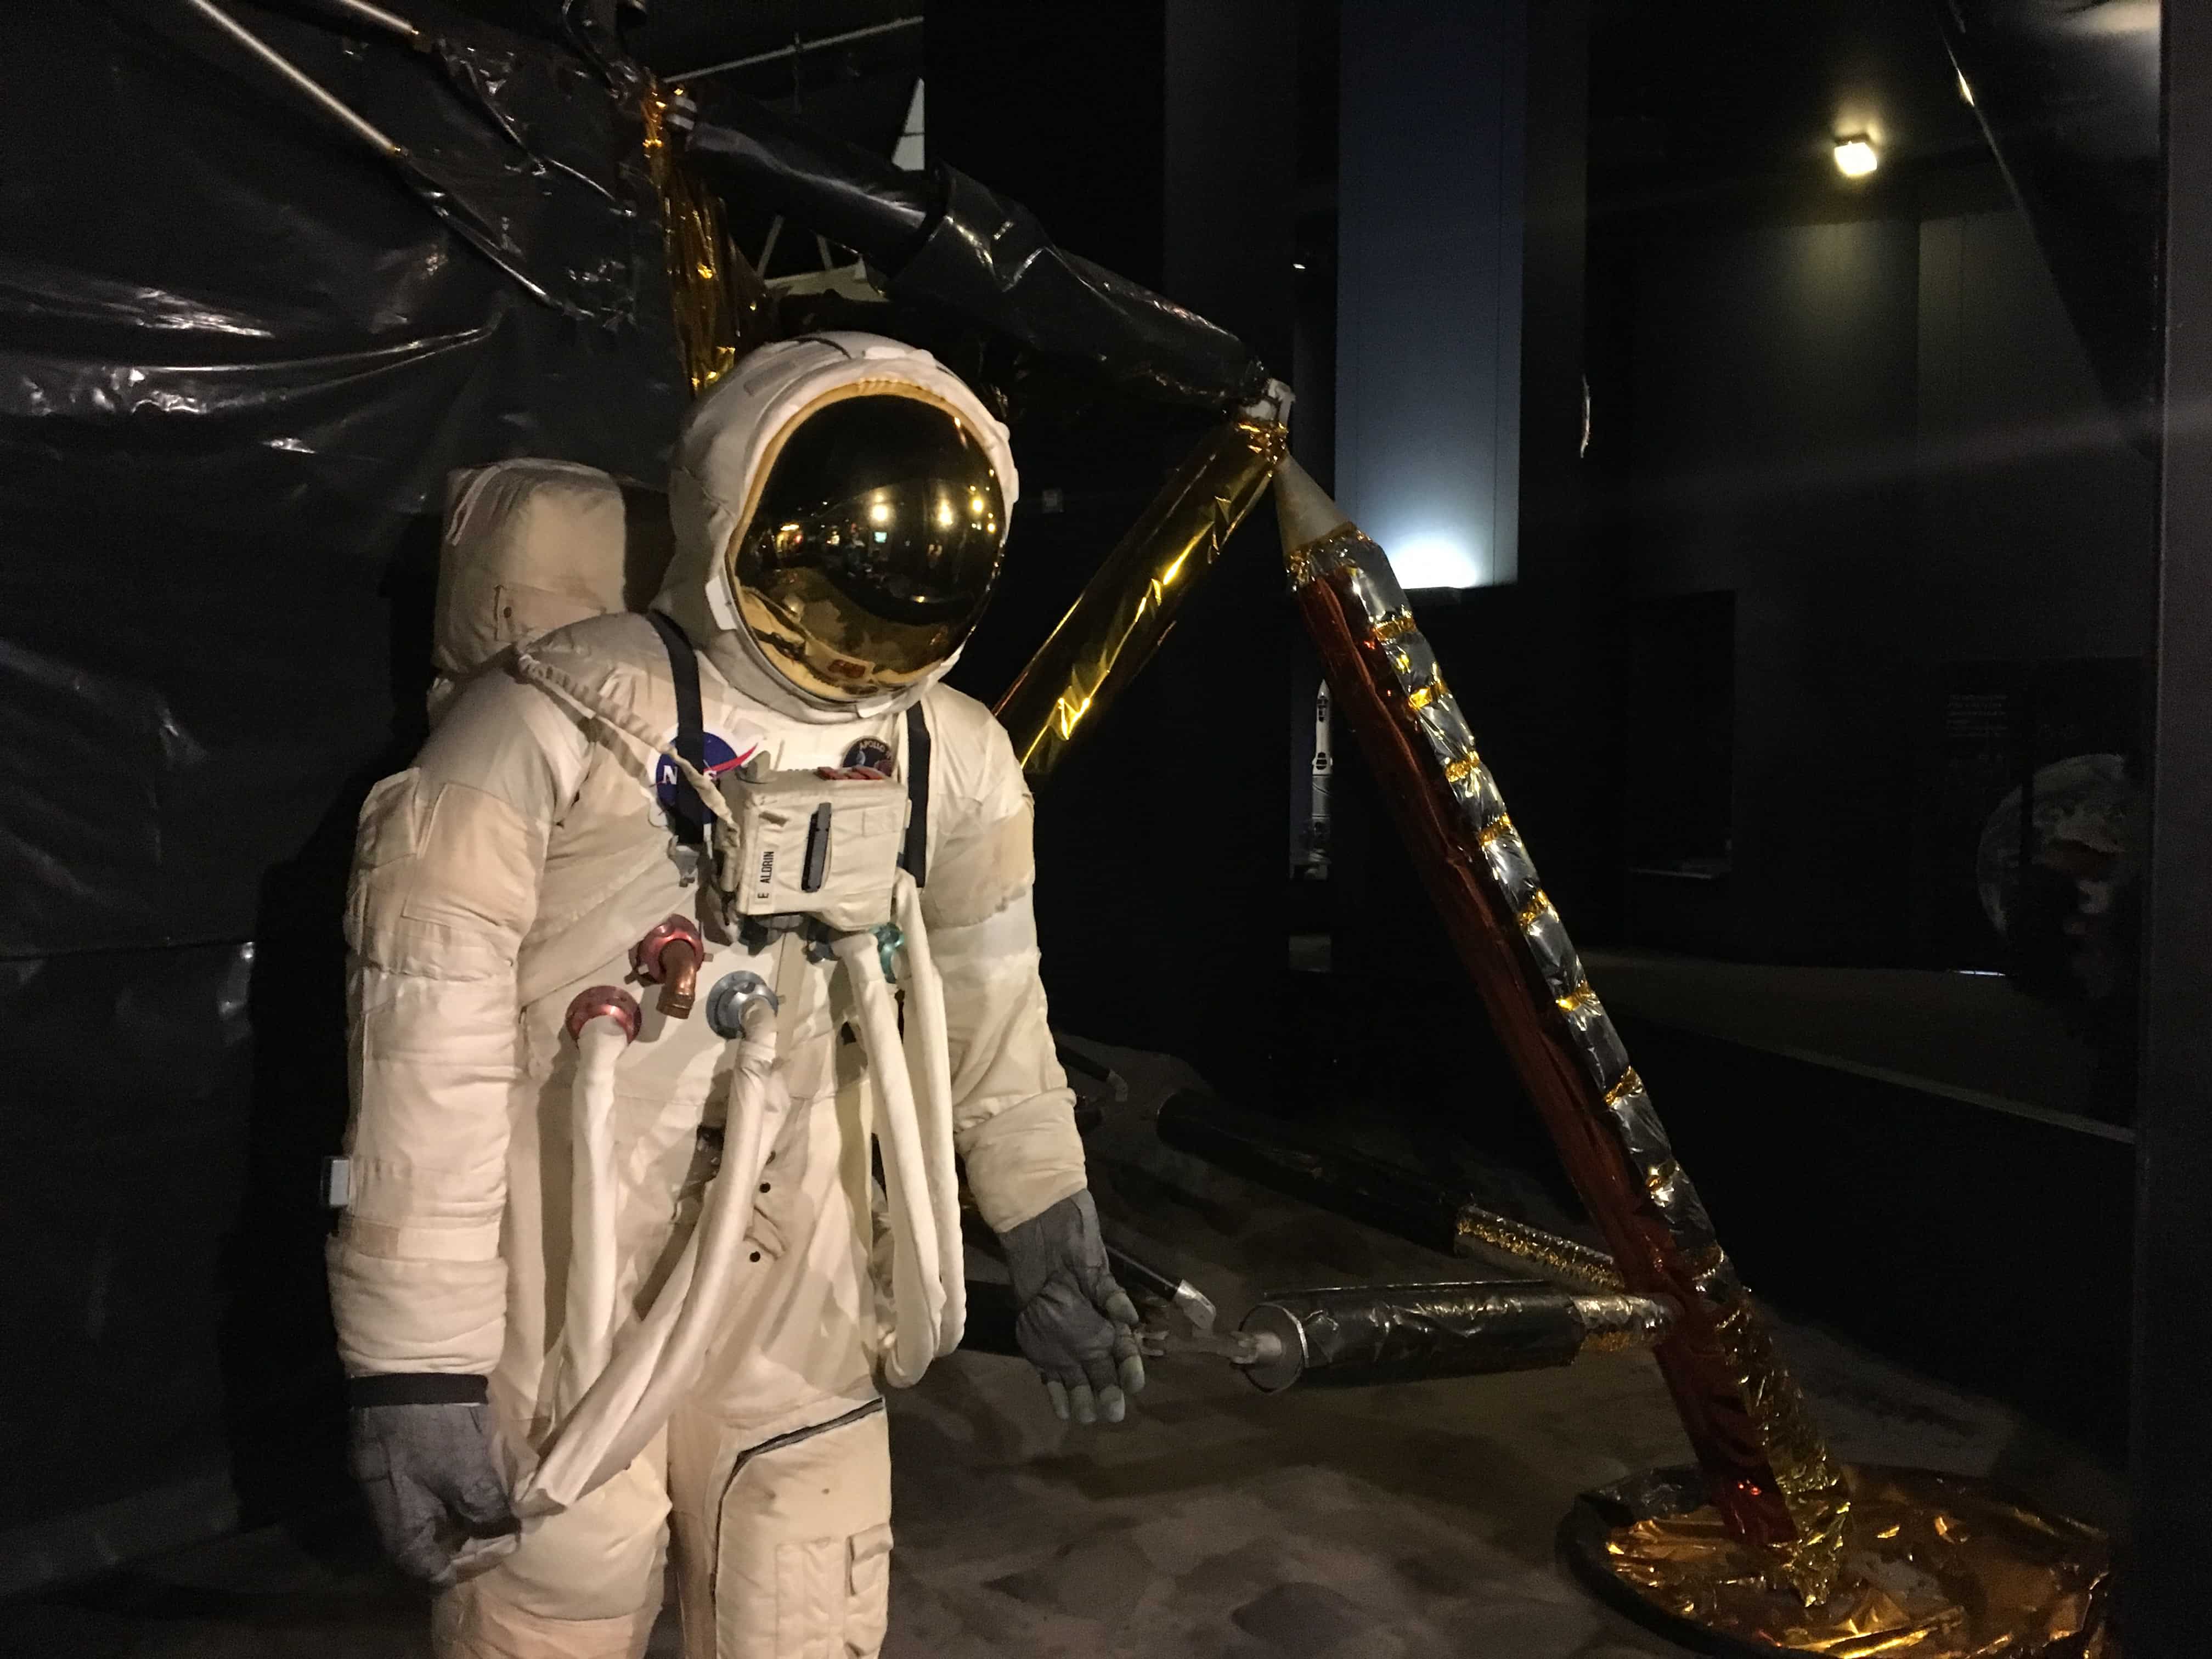 A rather stiff atronaut standing next to a tarped lunar module standing on gold foiled legs